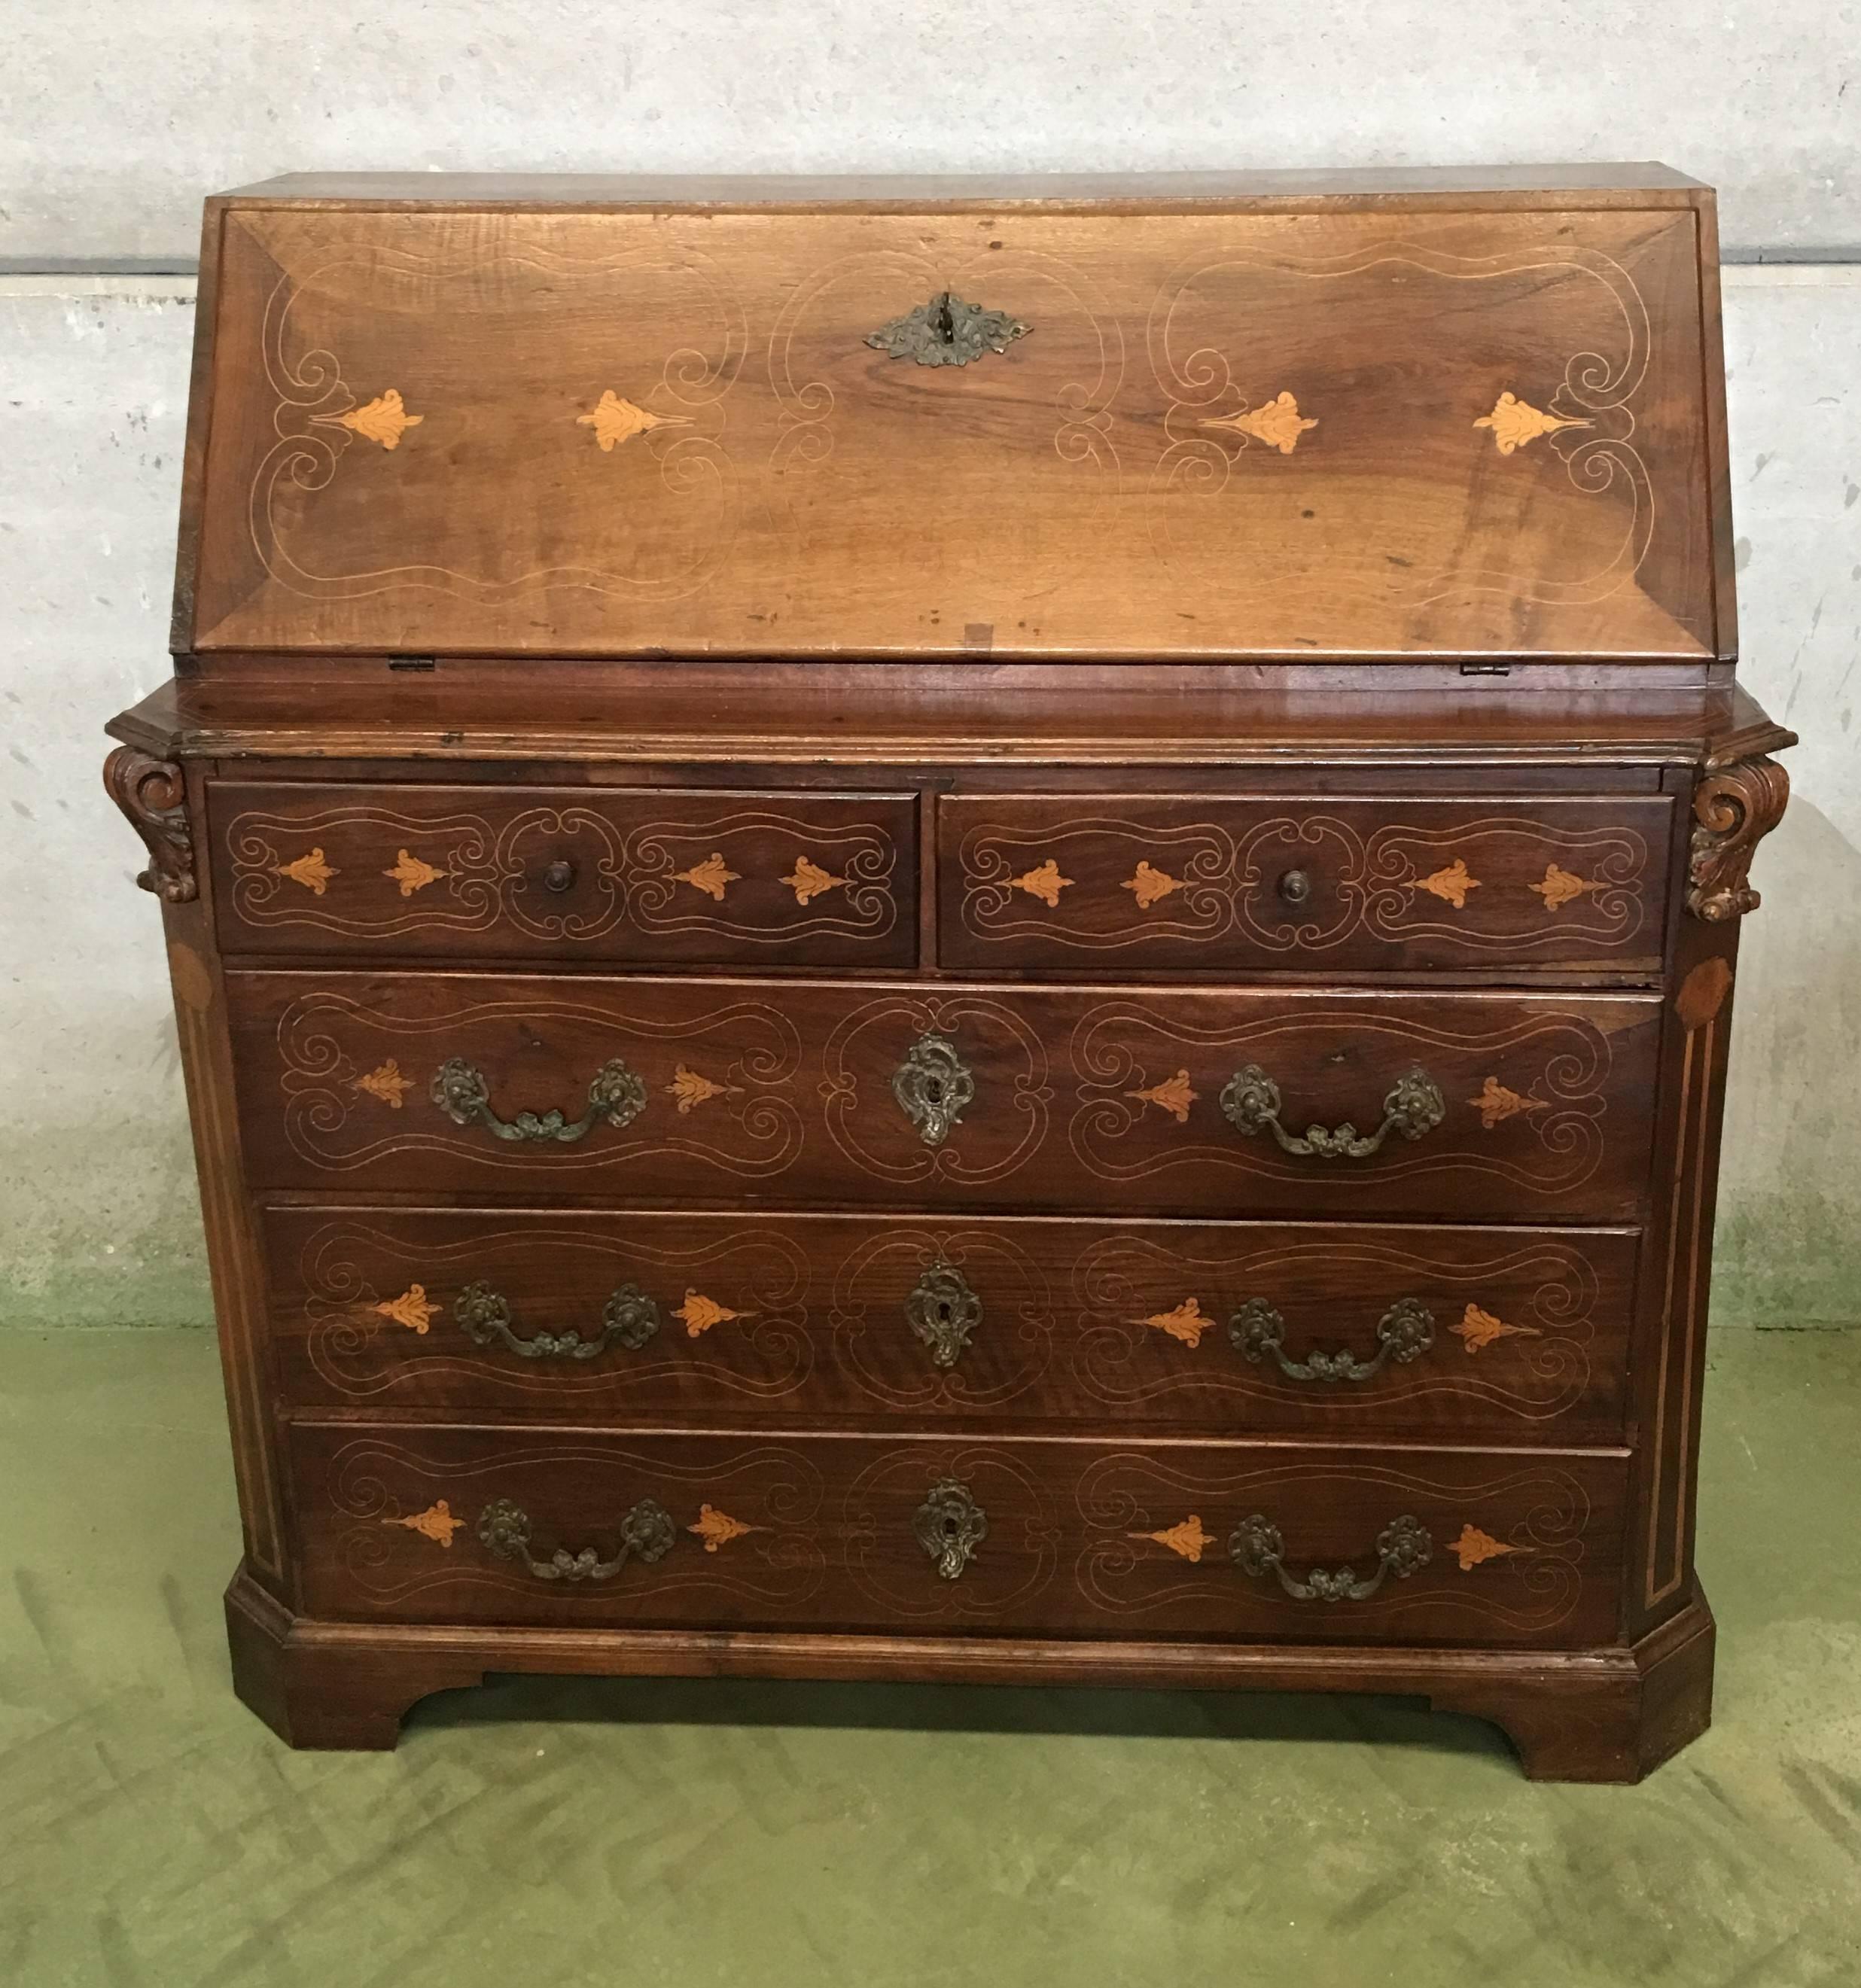 18th century Spanish walnut marquetry bureau.

This is an exquisite antique Spanish bureau, circa 1780 in date this elegant bureau will soon become the centrepiece of your furniture collection and can suitably house your most valued collectibles.